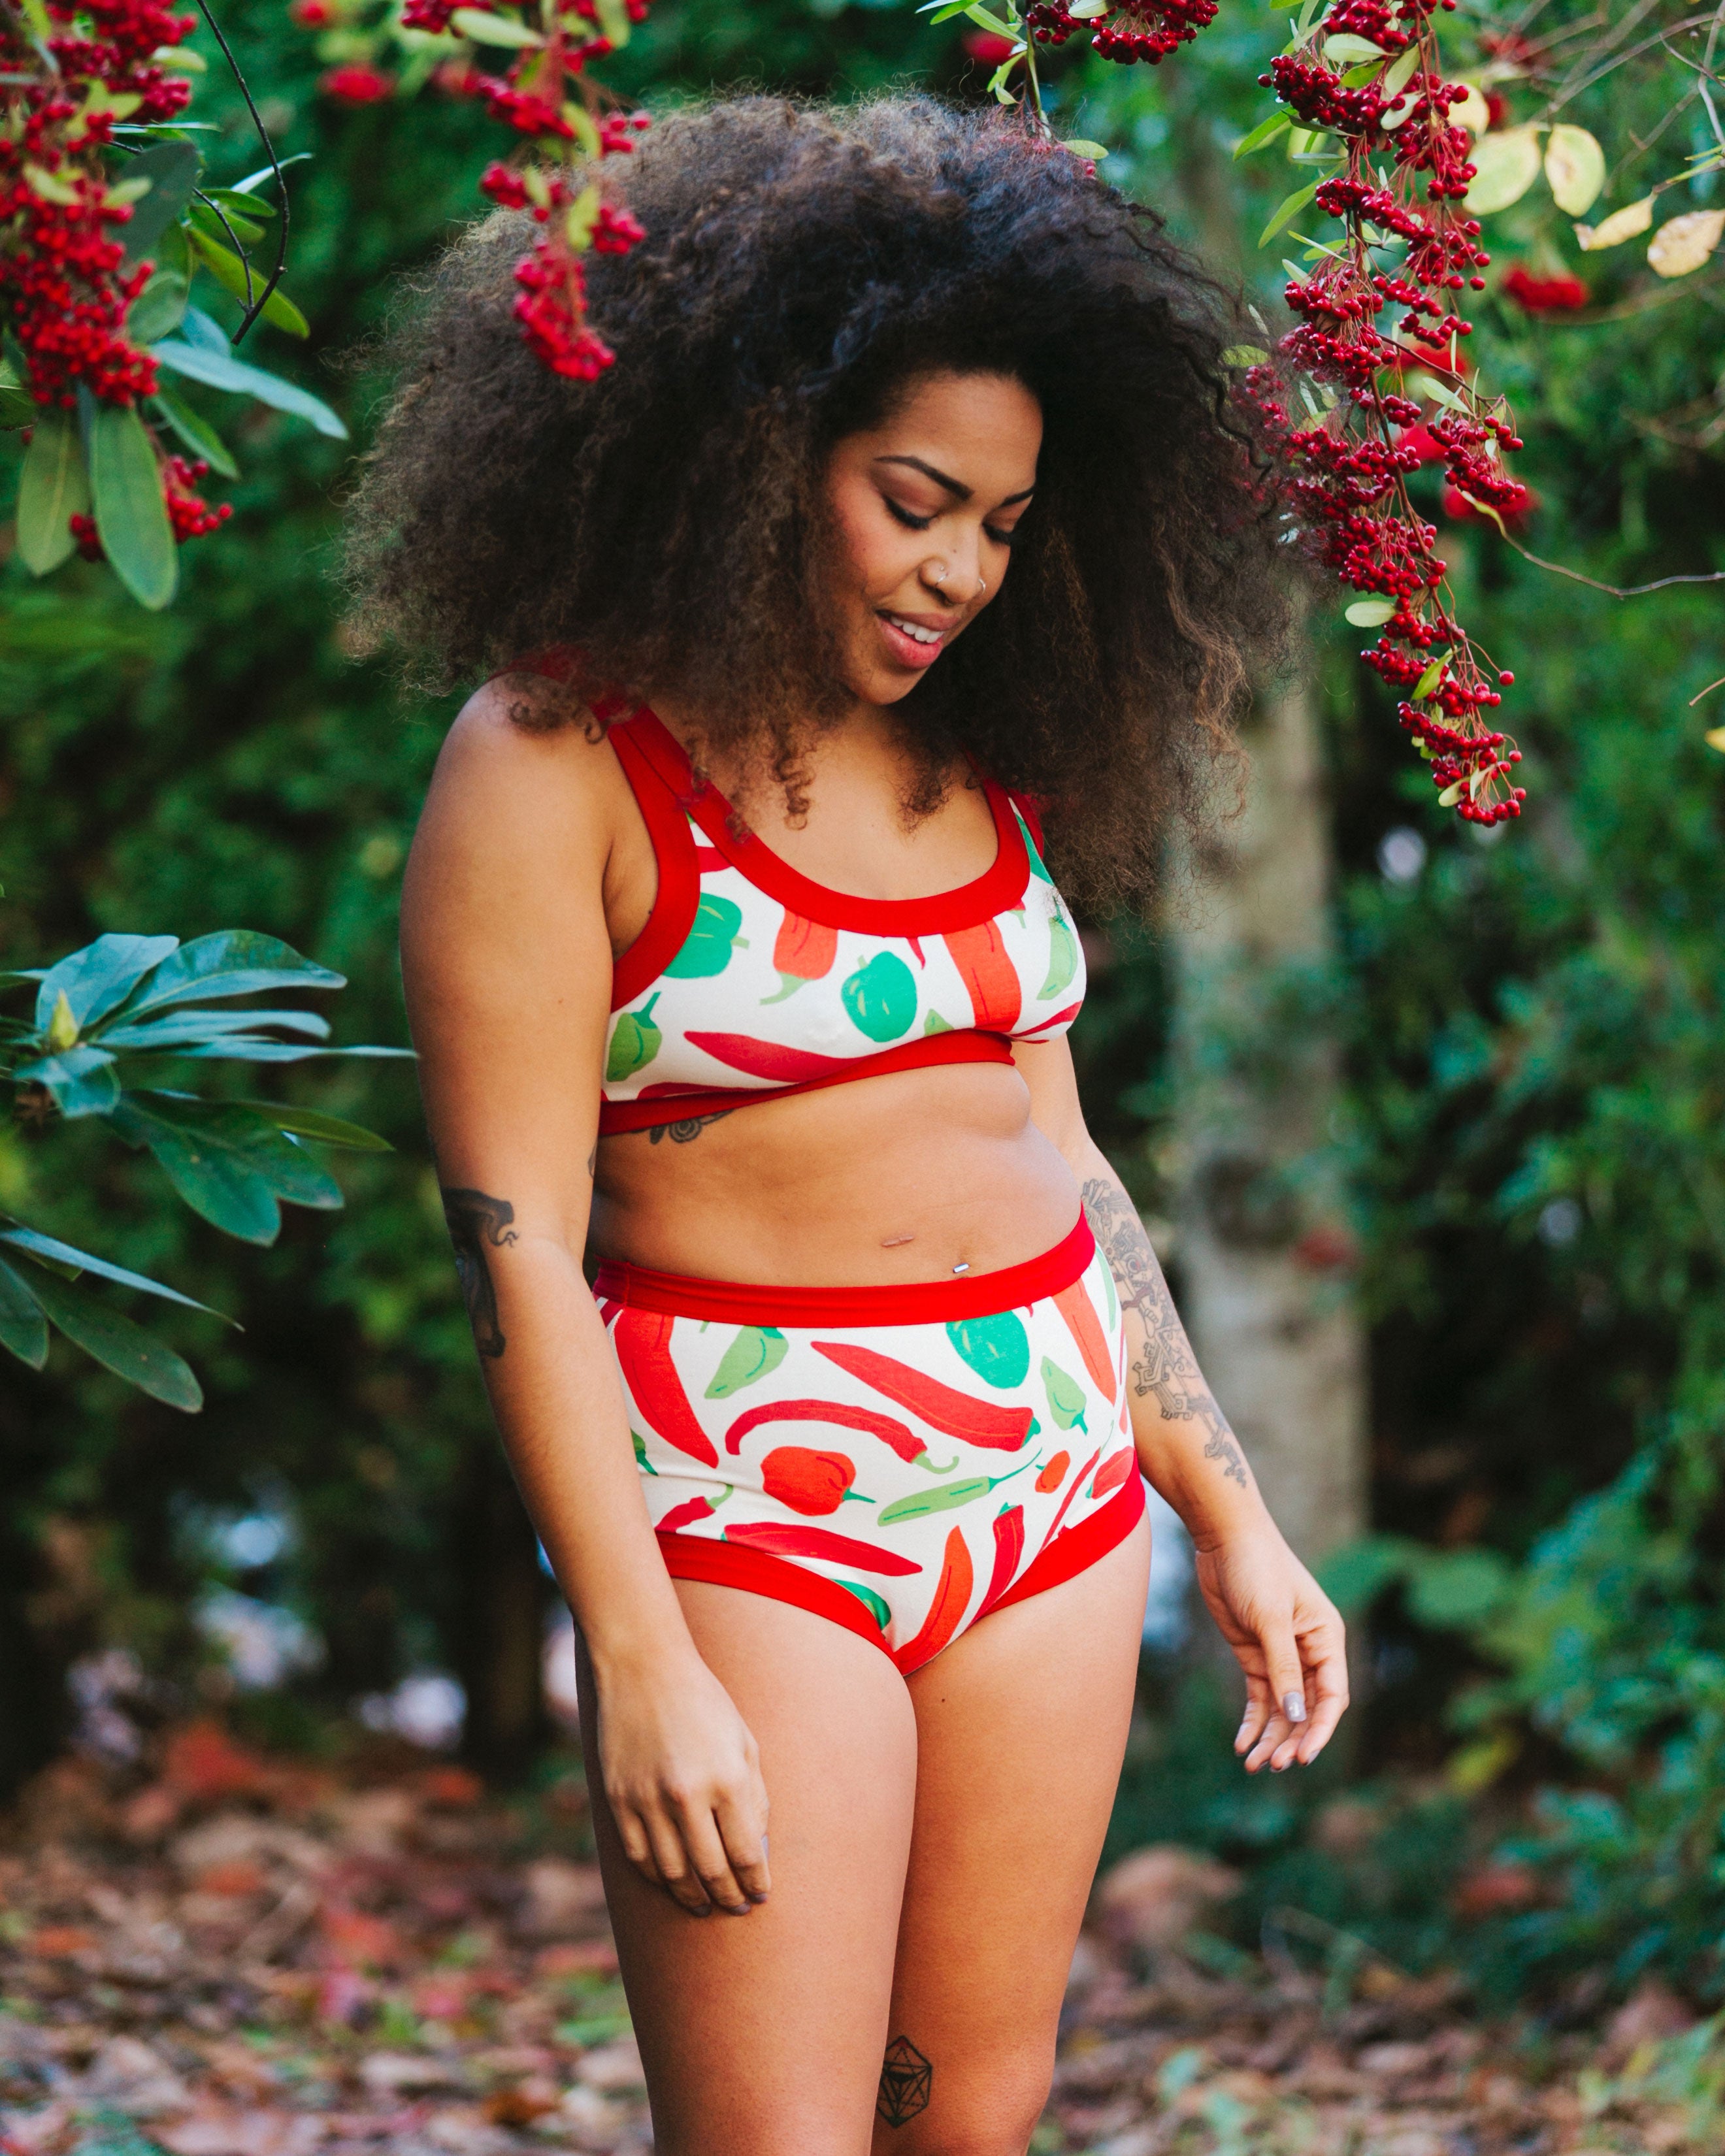 Model standing outside wearing Thunderpants organic cotton Original style underwear and Bralette in our Hot Pants print: various green, orange, and red peppers printed on Vanilla with red binding.